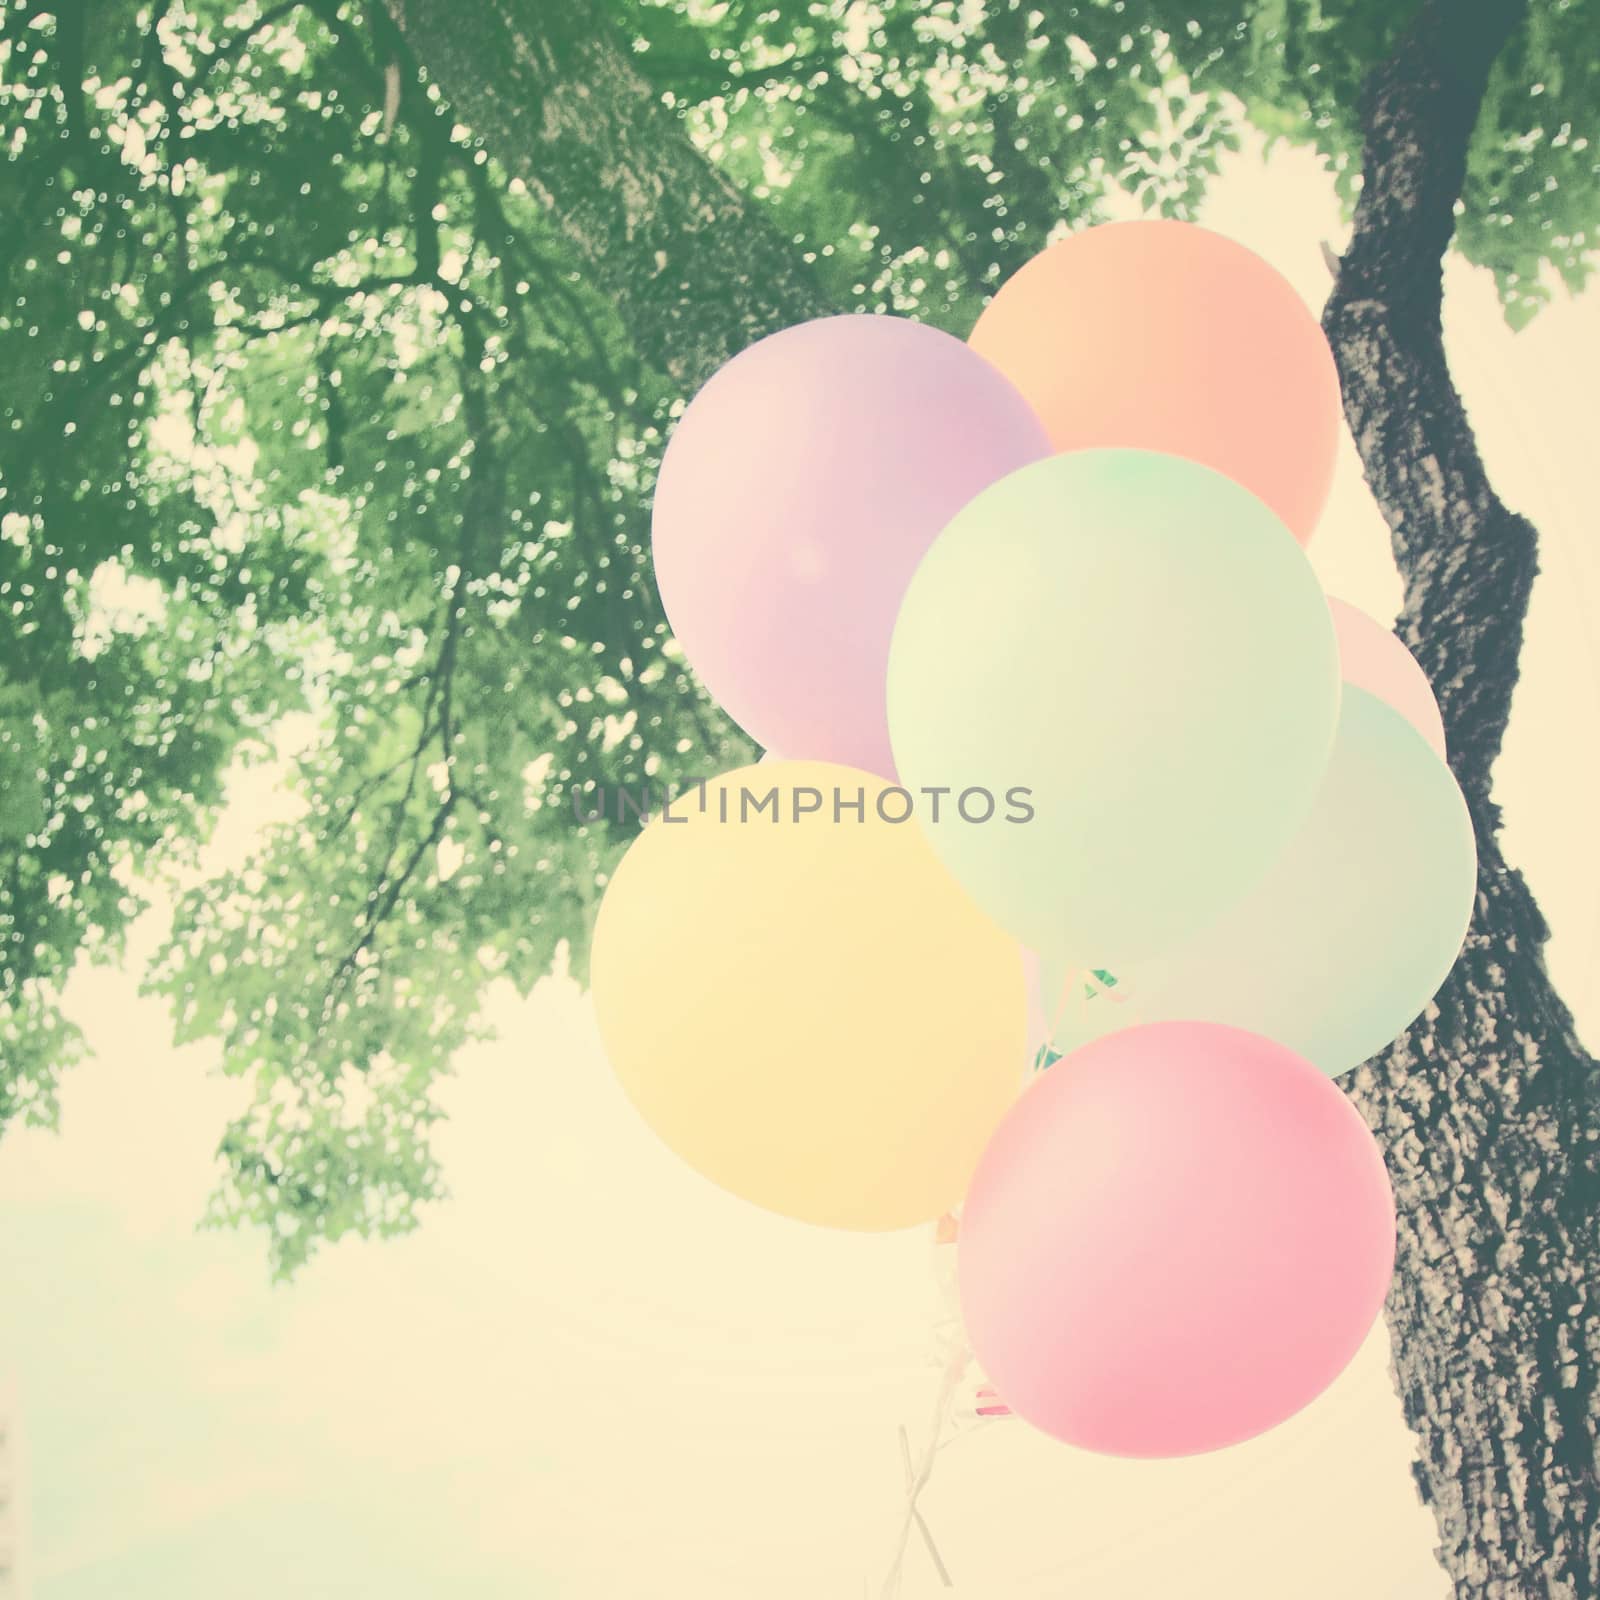 Colorful festive balloons on tree with retro filter effect 